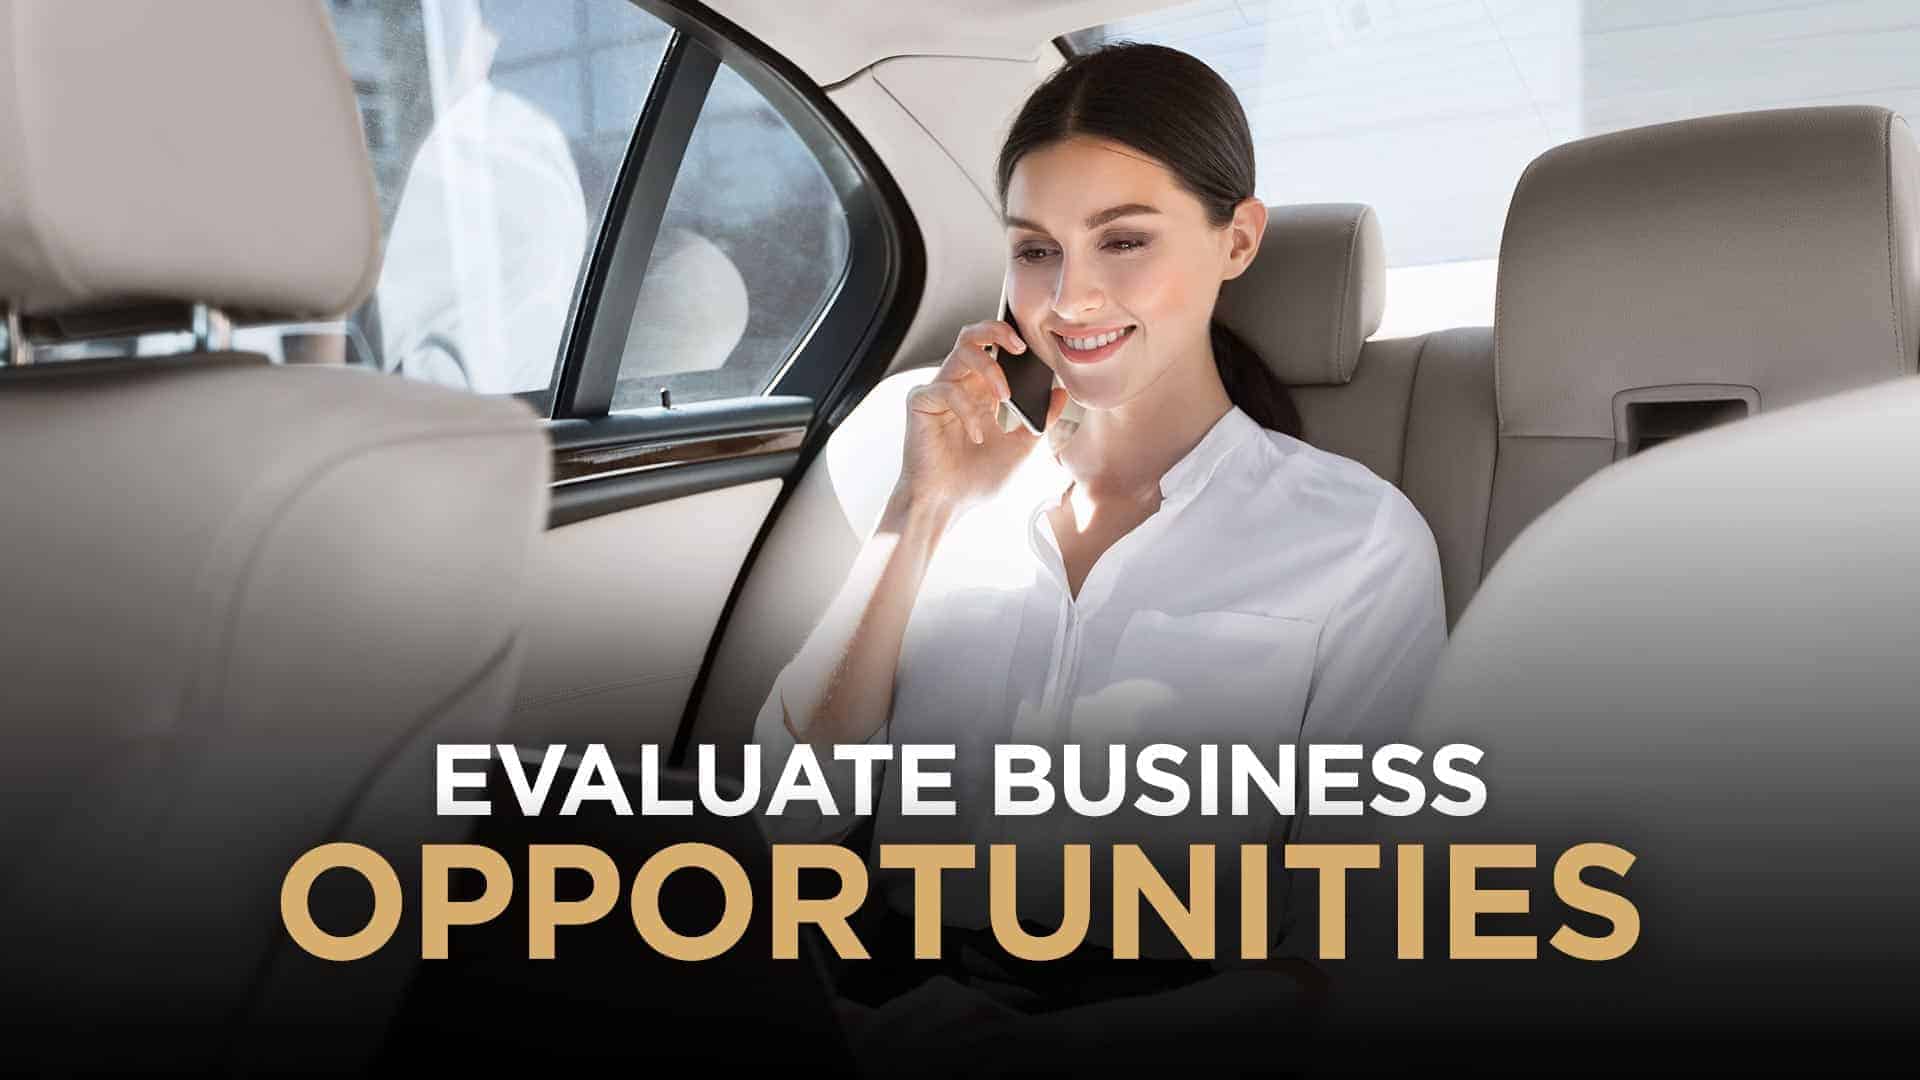 Evaluate business opportunities feature image